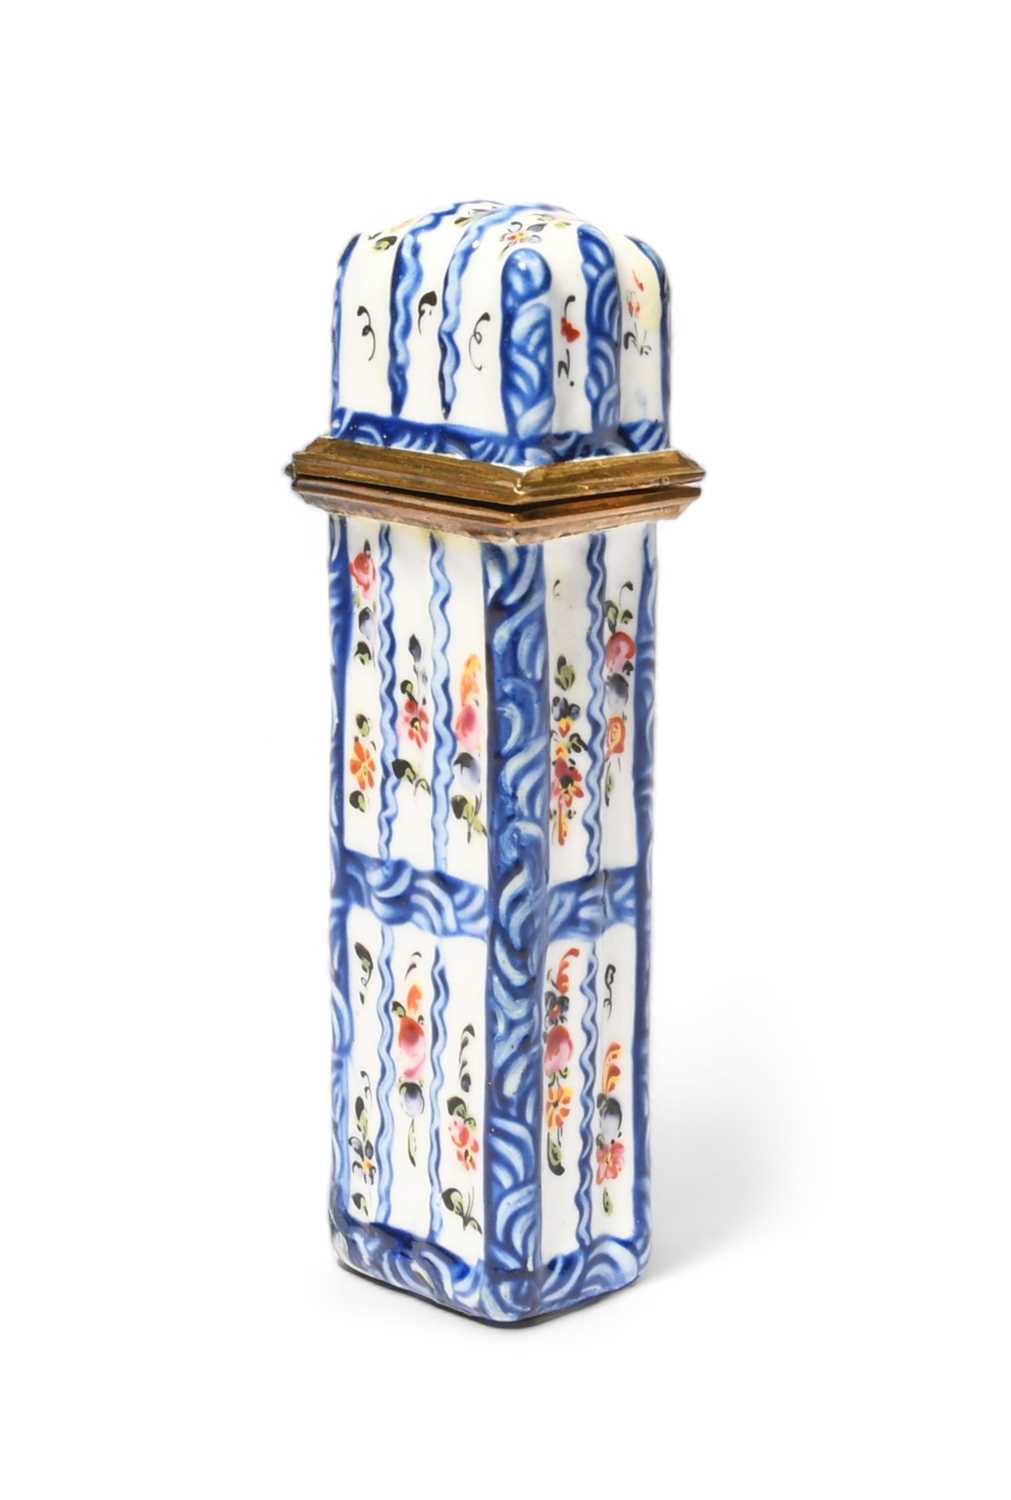 A Staffordshire enamel scent bottle case, c.1780, of moulded rectangular form, painted with narrow